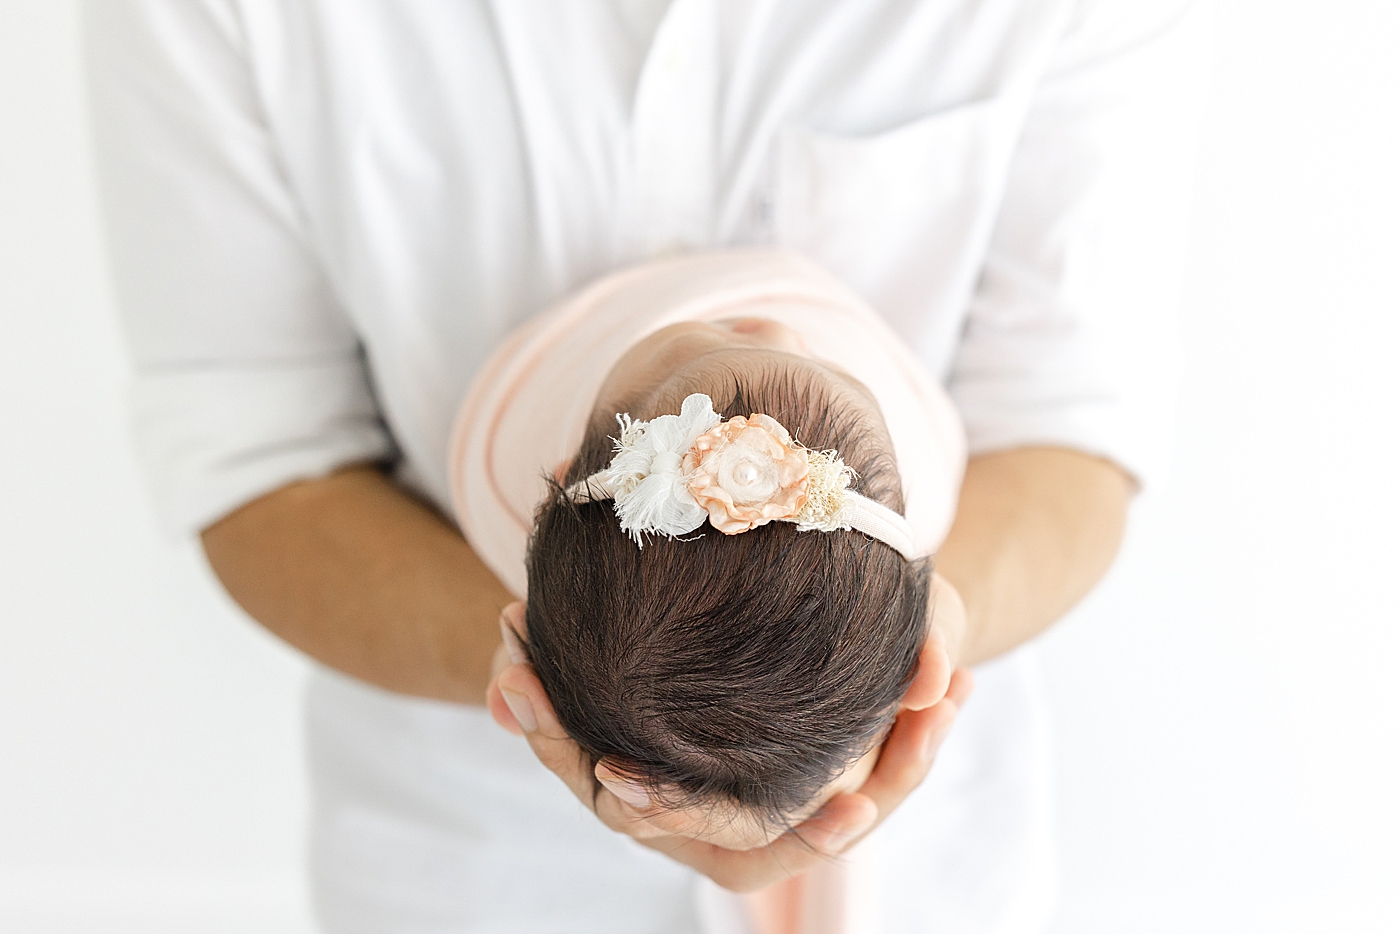 Detail of dad holding his newborn baby girl | Image by Sana Ahmed